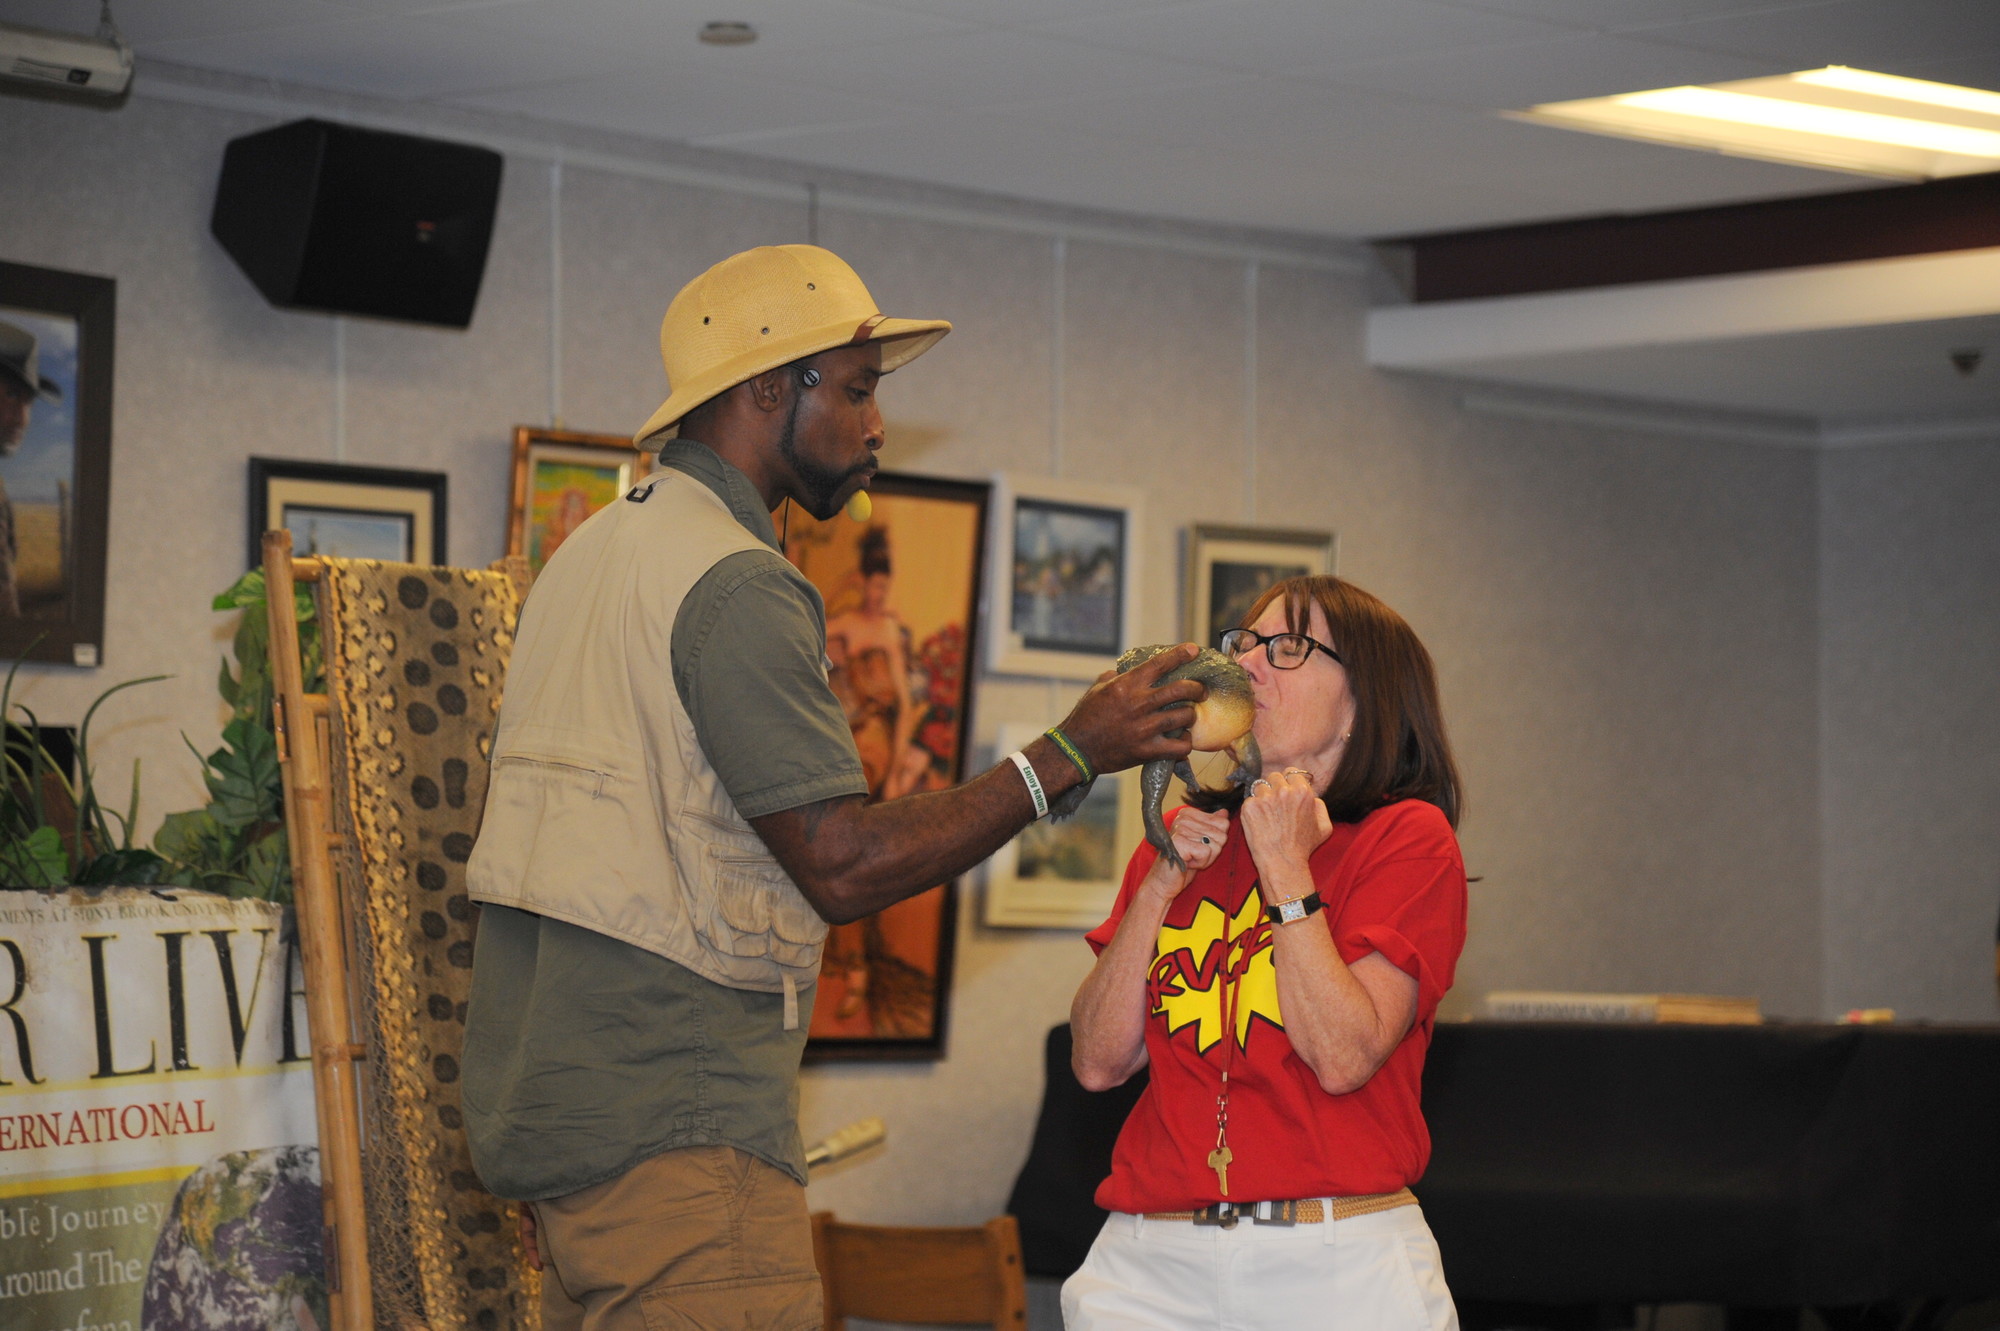 Librarian Terry Ain kissed the bullfrog that Erik Callendar brought to the Rockville Centre Public Library as part of his traveling show on reptiles, amphibians and other cool and creepy creatures. (Donovan Berthoud/Herald)